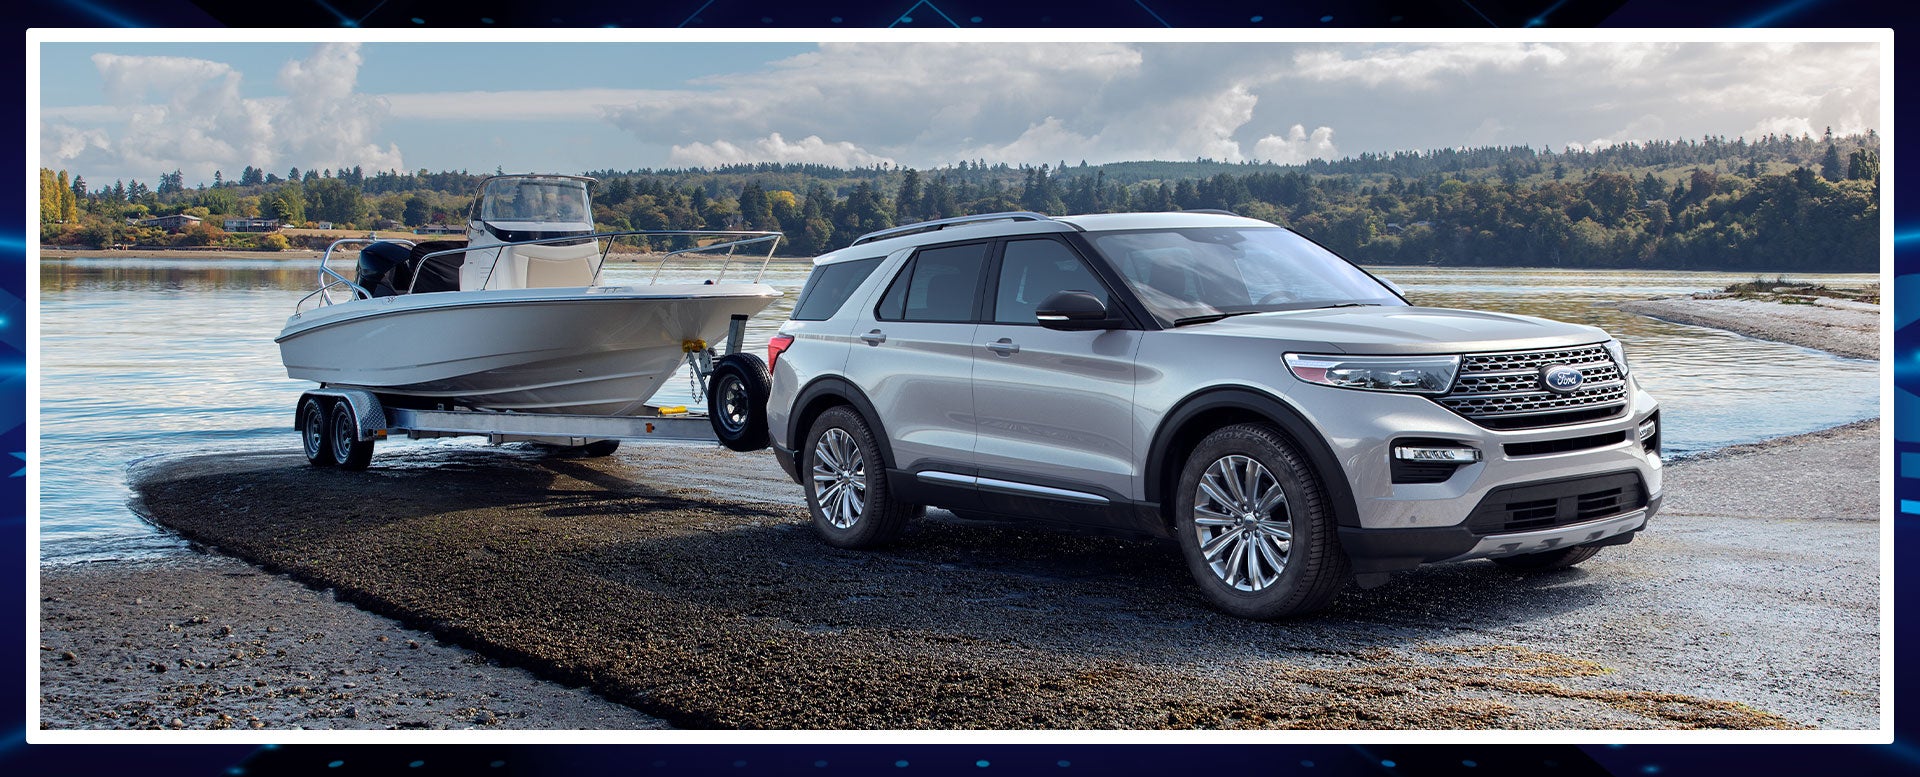 2022 Ford Explorer Towing Capacity